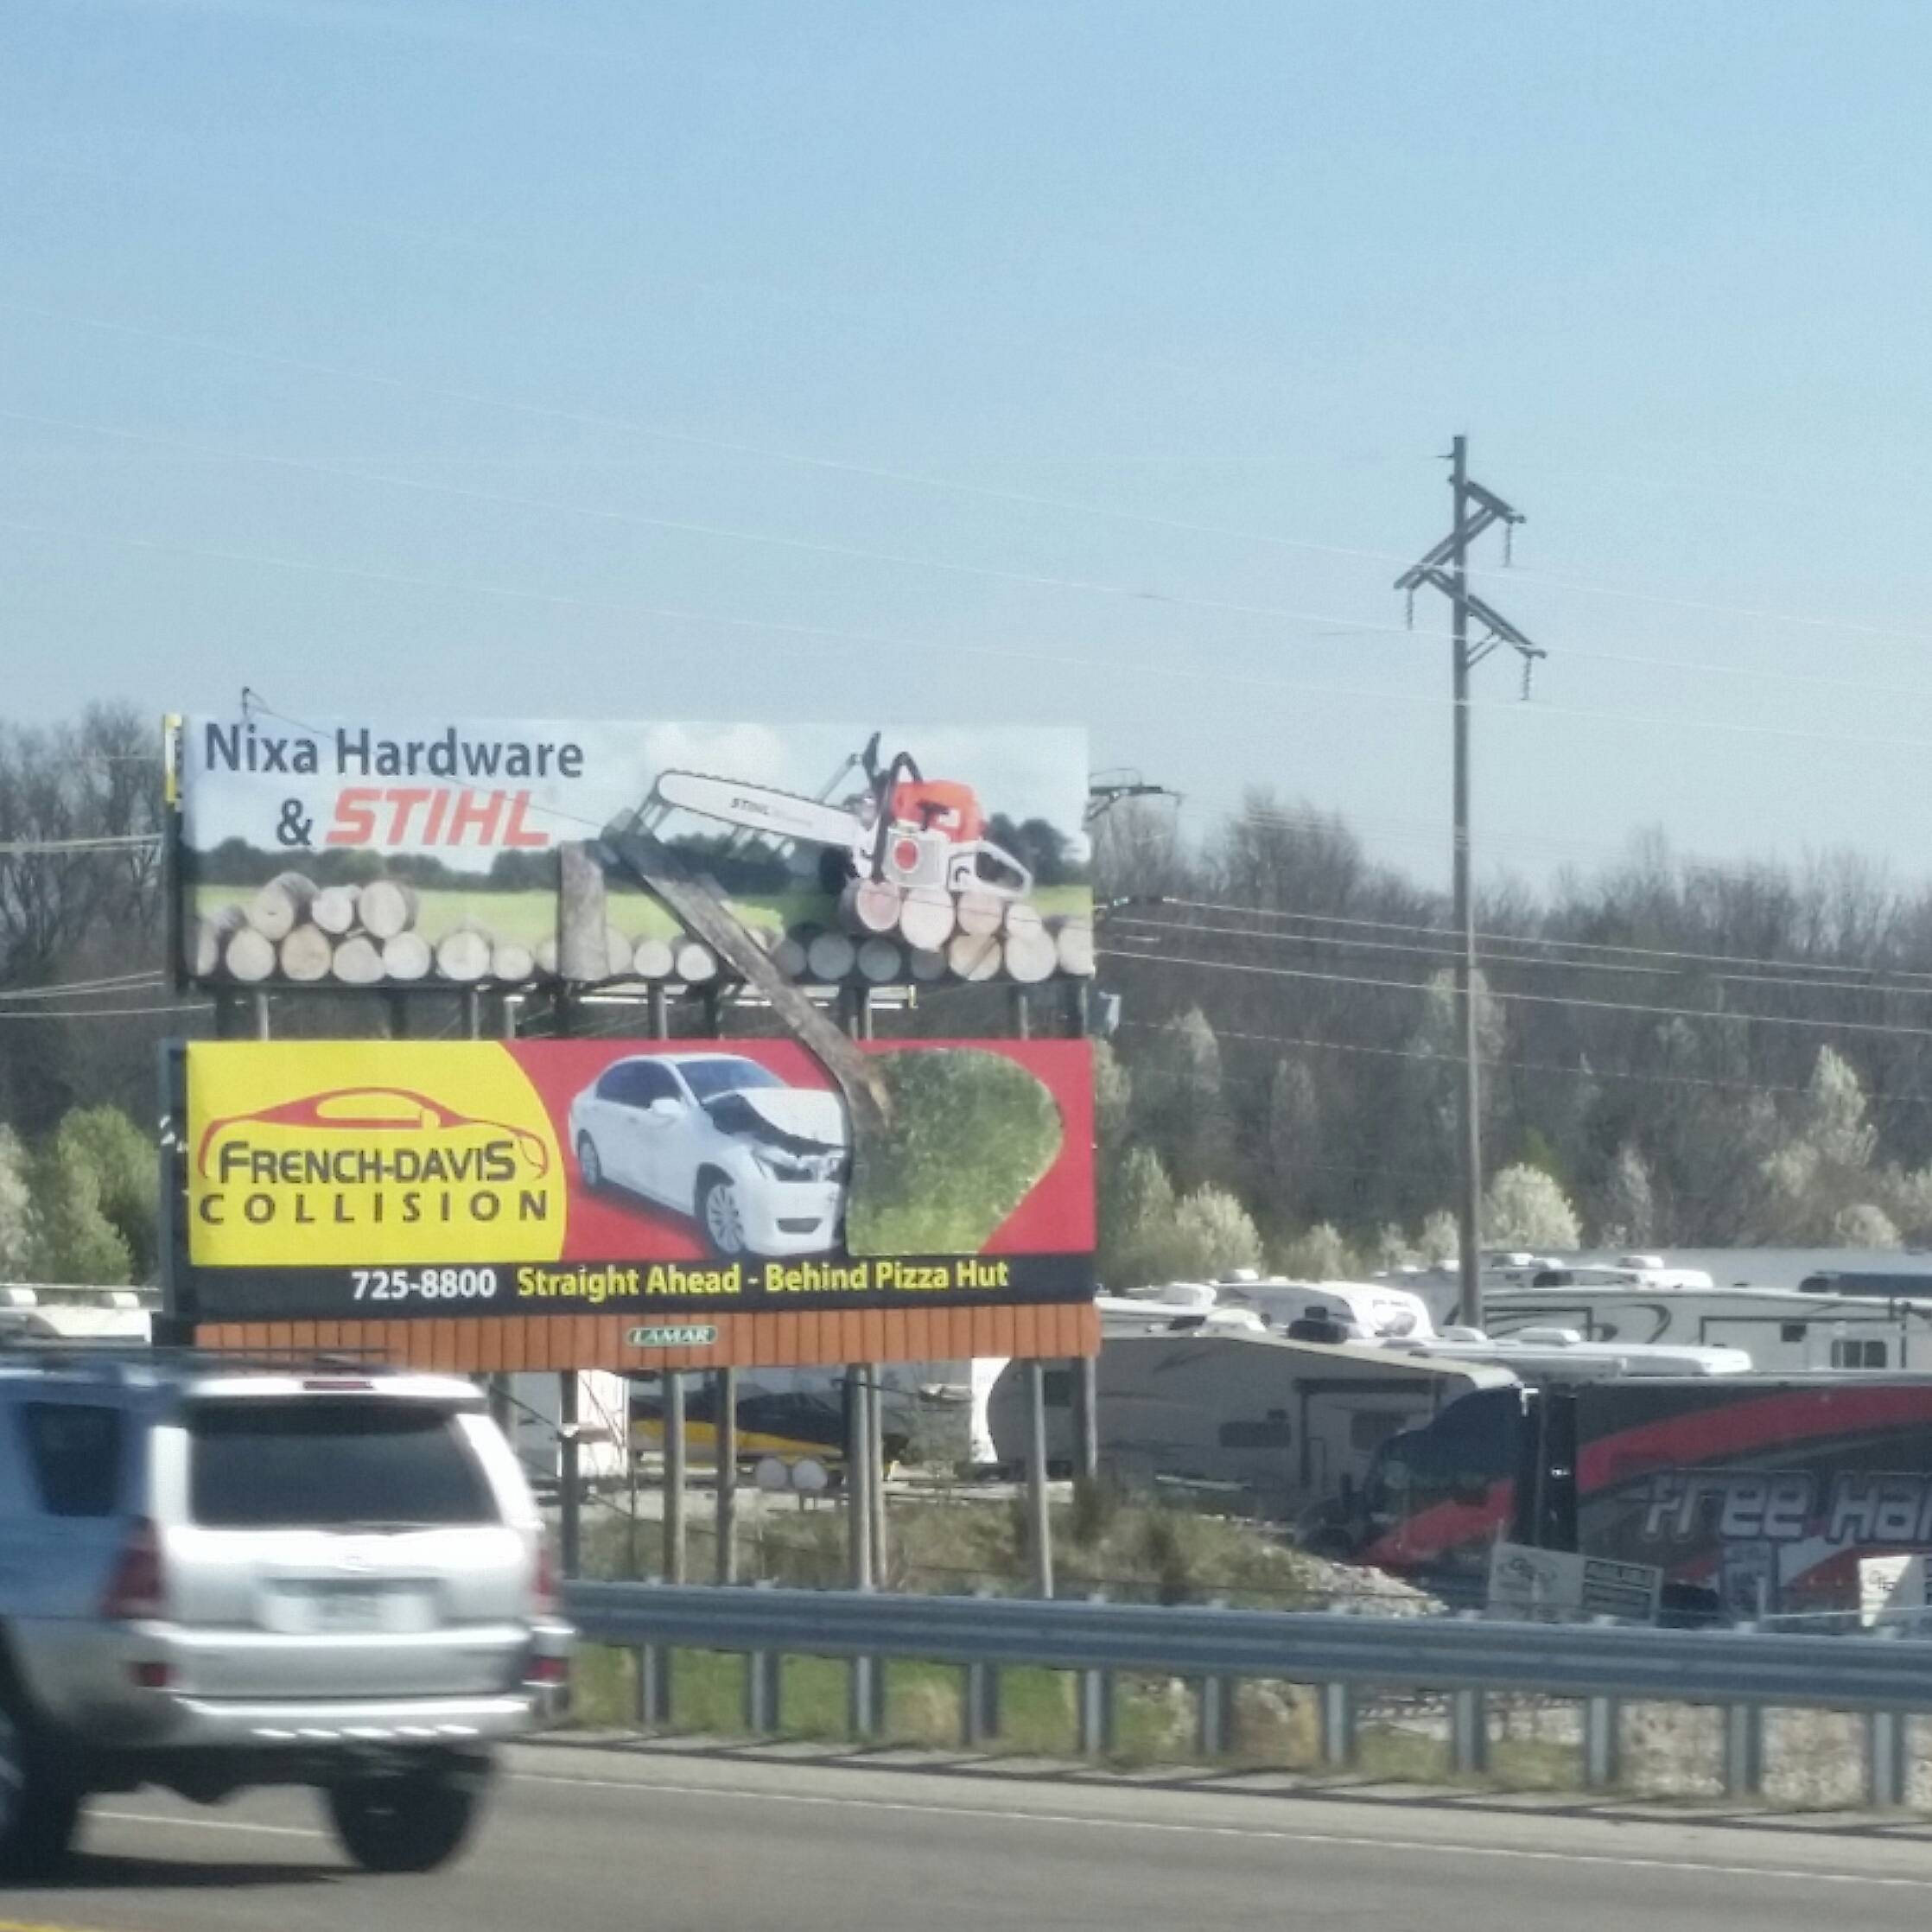 The way these two local businesses combined their billboards.